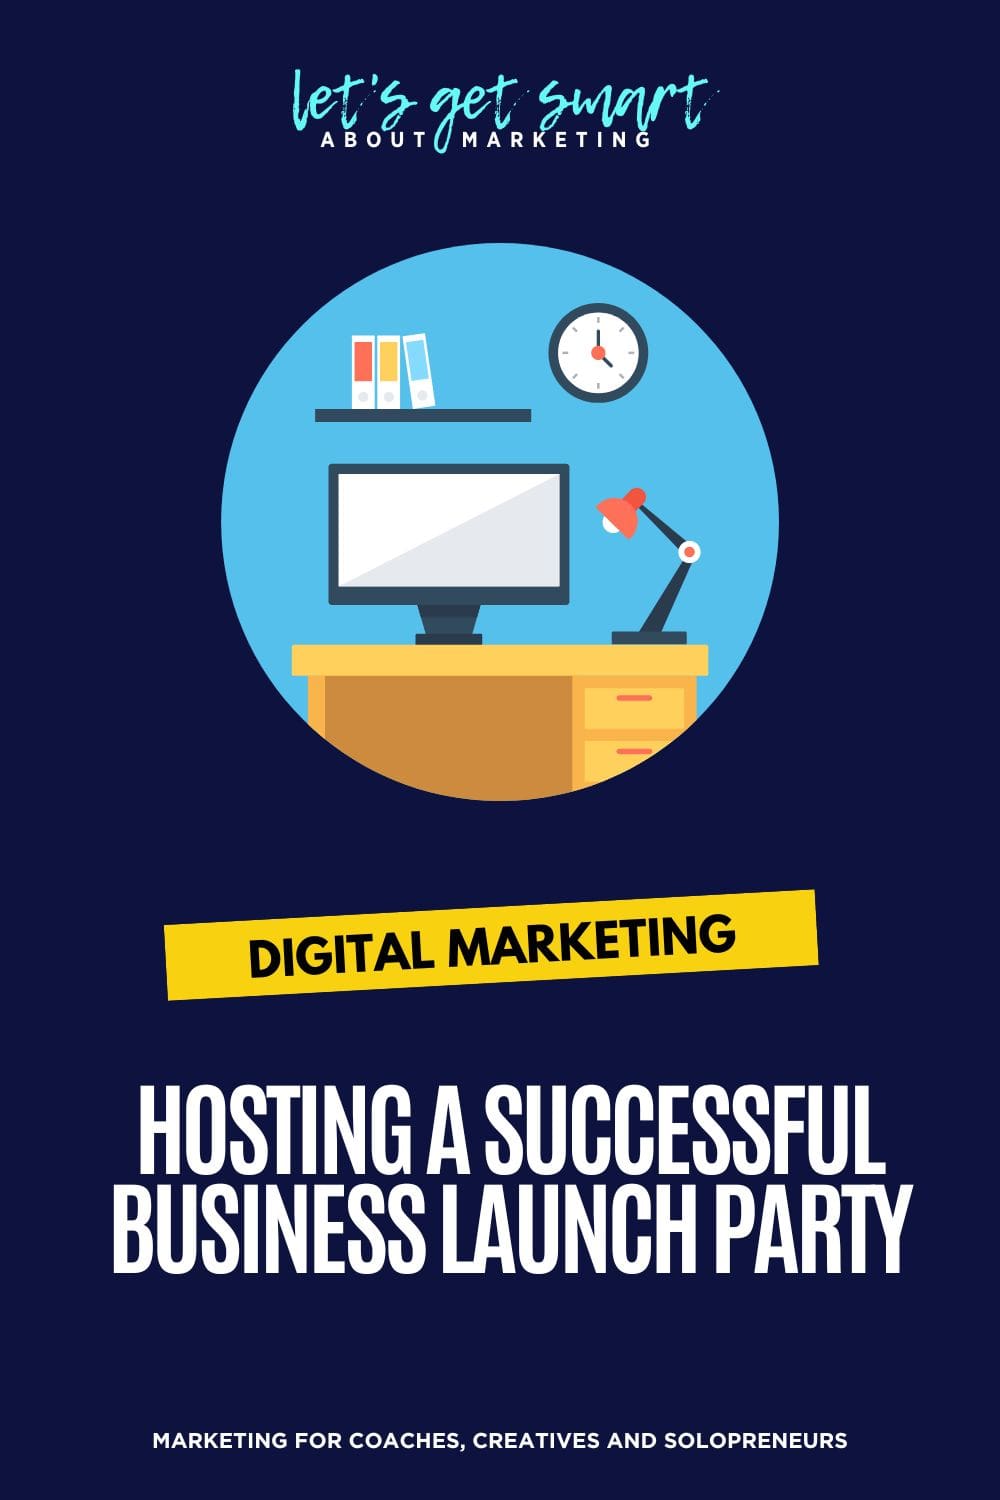 Hosting a Successful Business Launch Party Pros and Cons